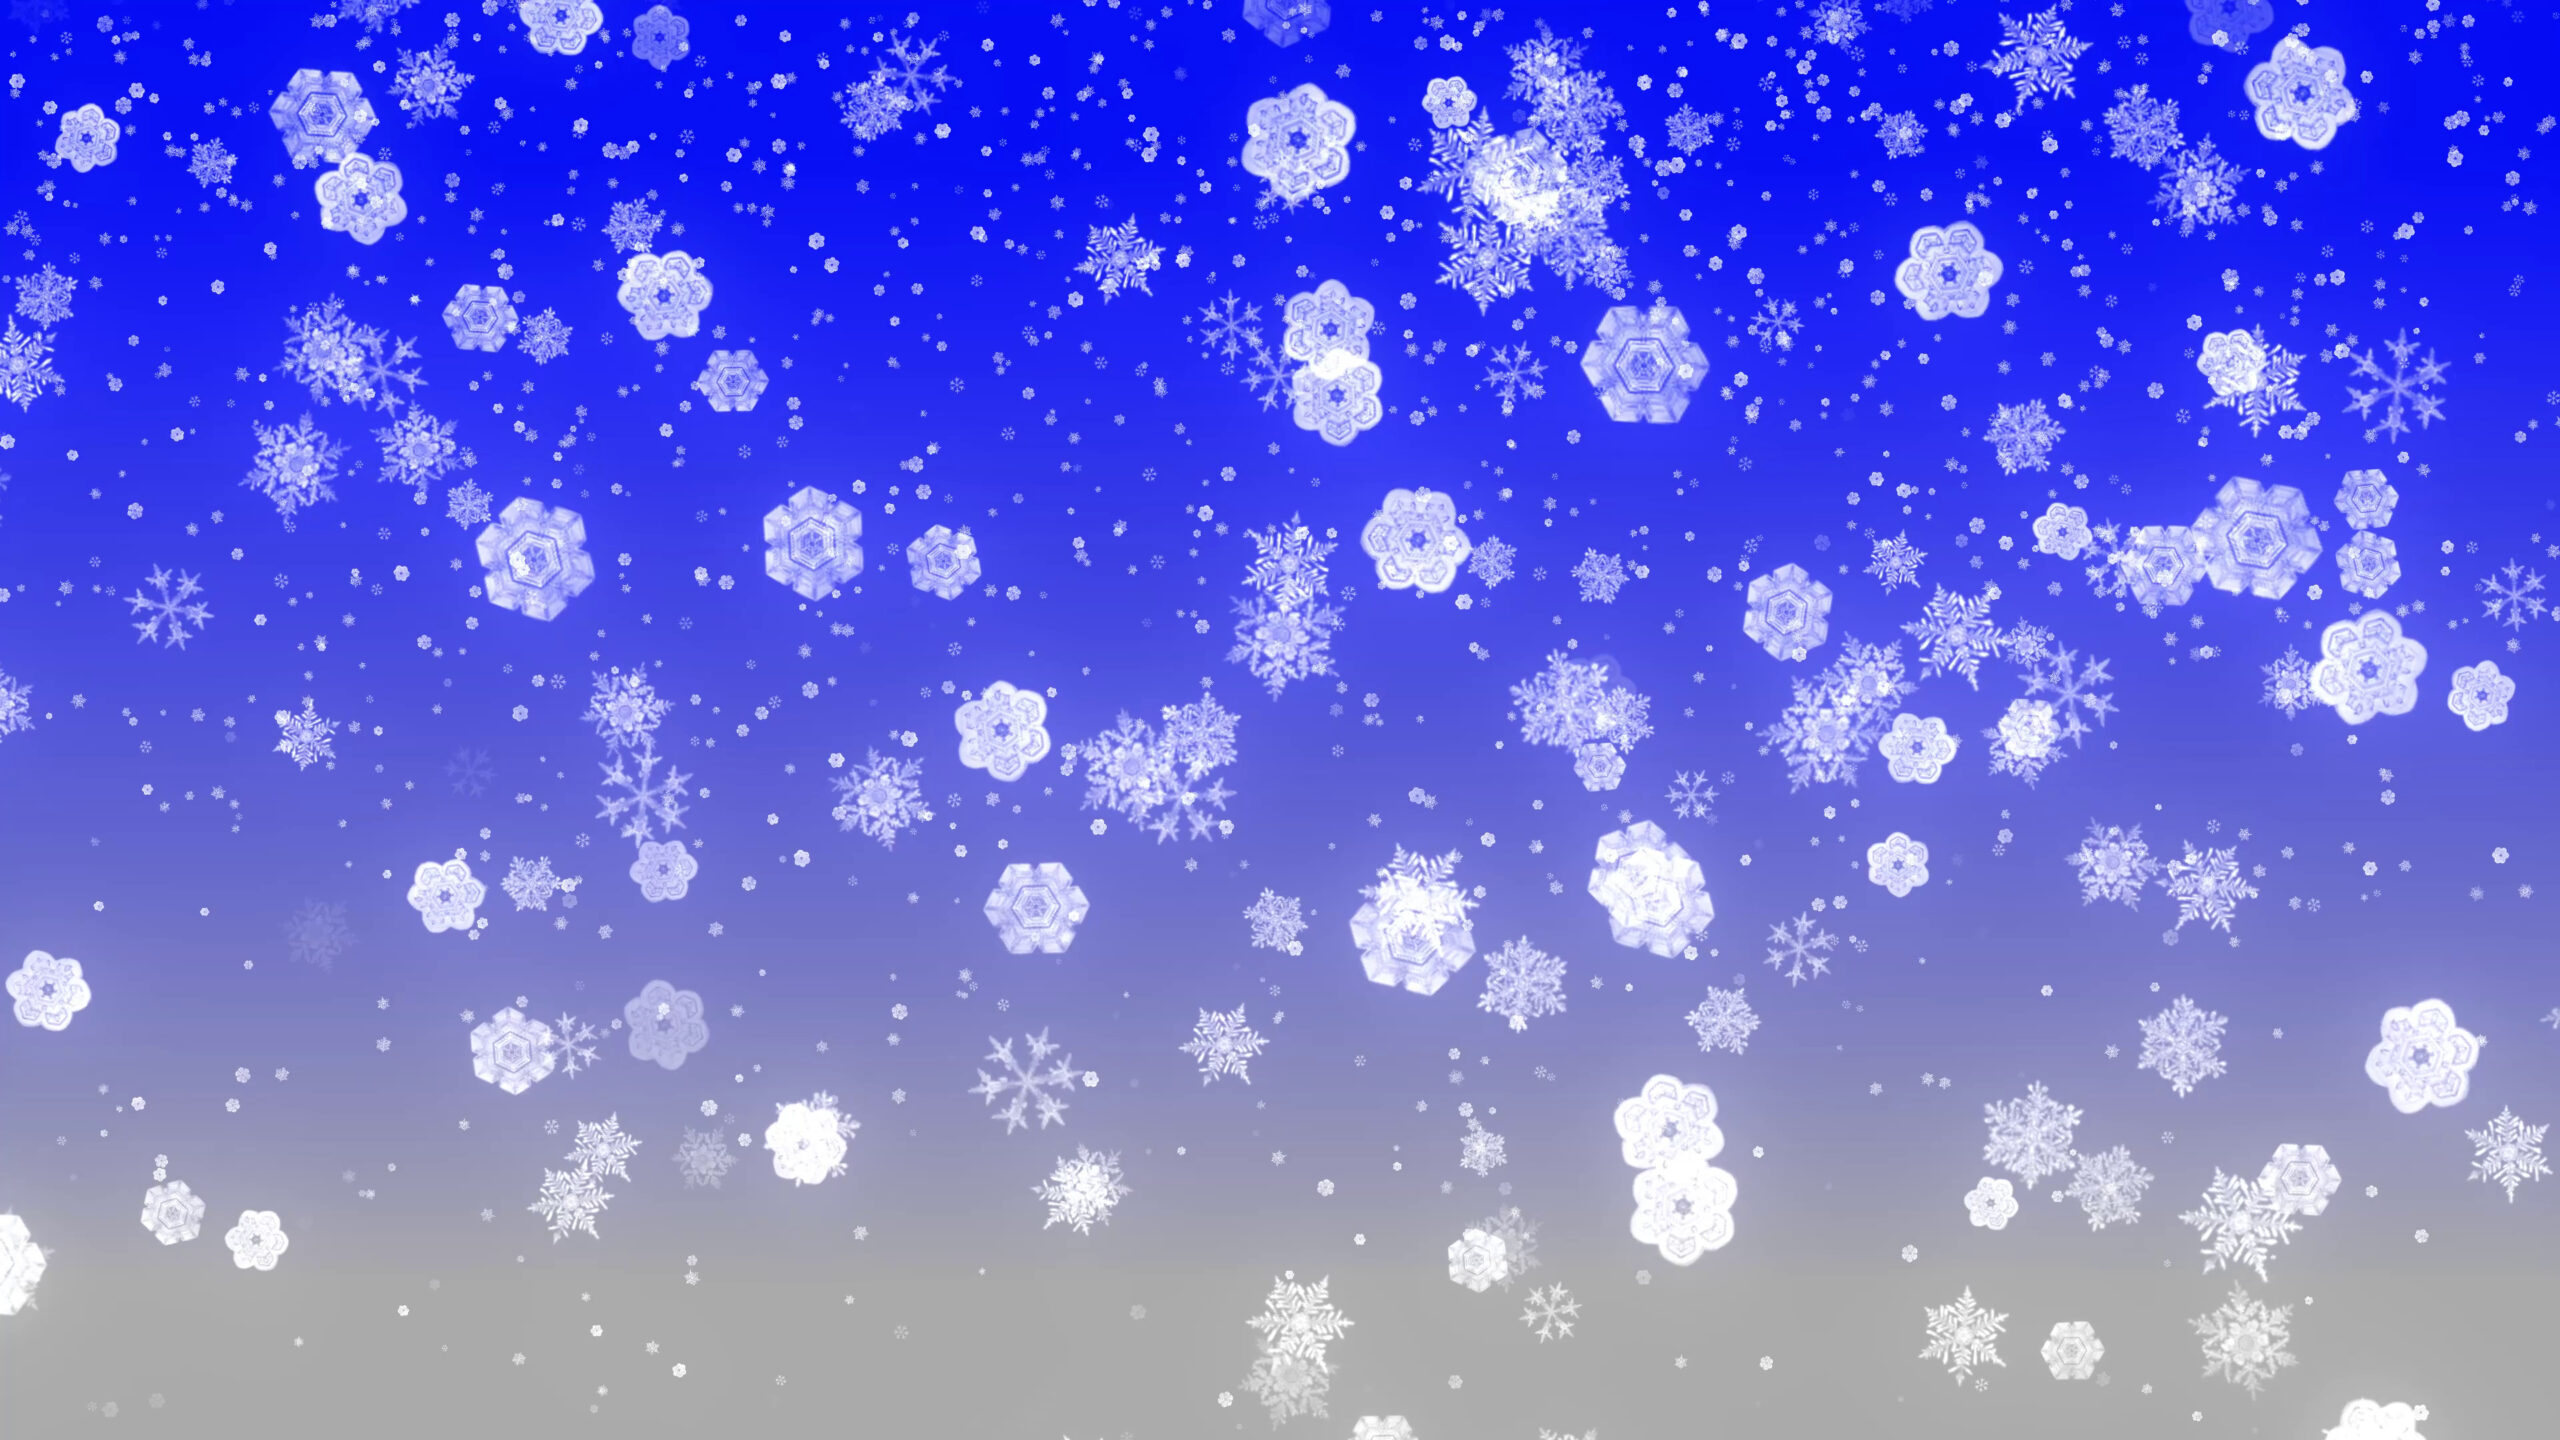 4K Snowflakes Motion Background || Free To Download Screensaver